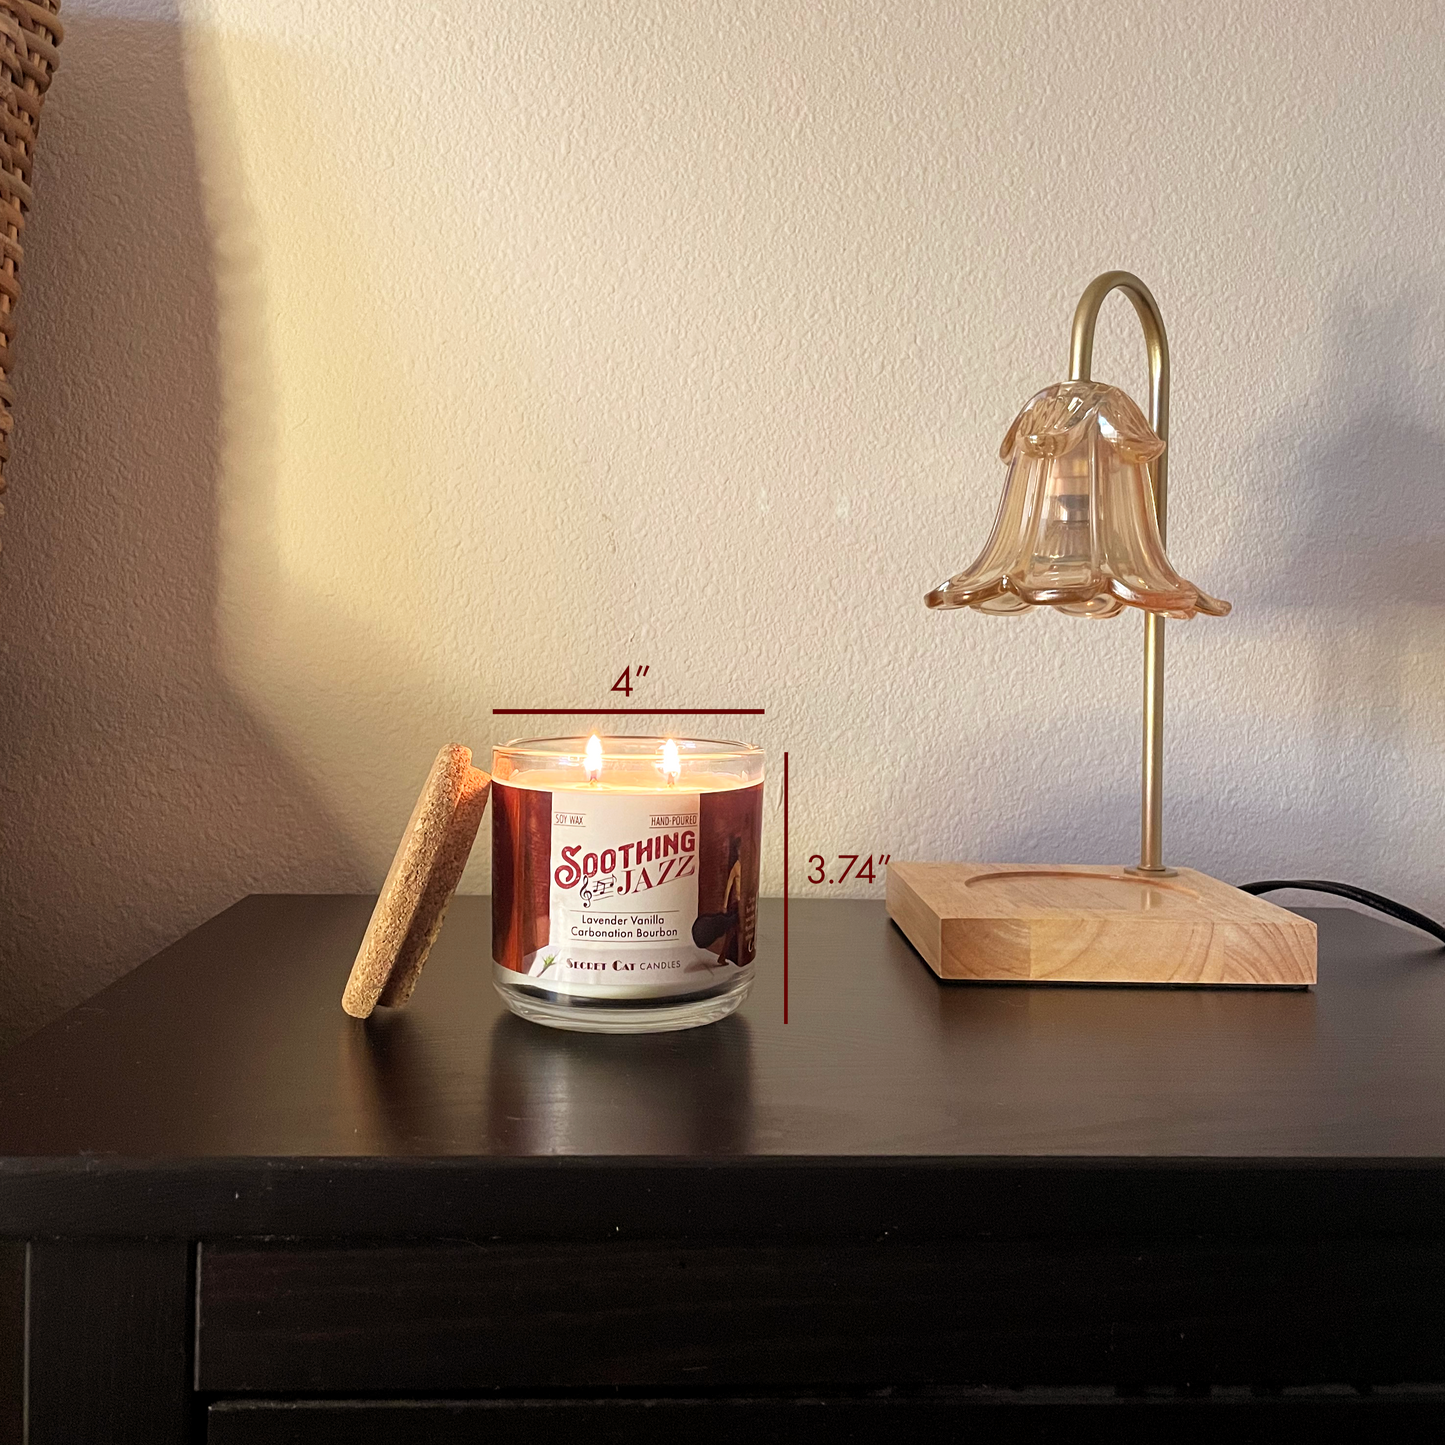 Bed scene with a lit candle on a nightstand next to a lamp. There are dimensions over the candle 4 inches by 3.74 inches